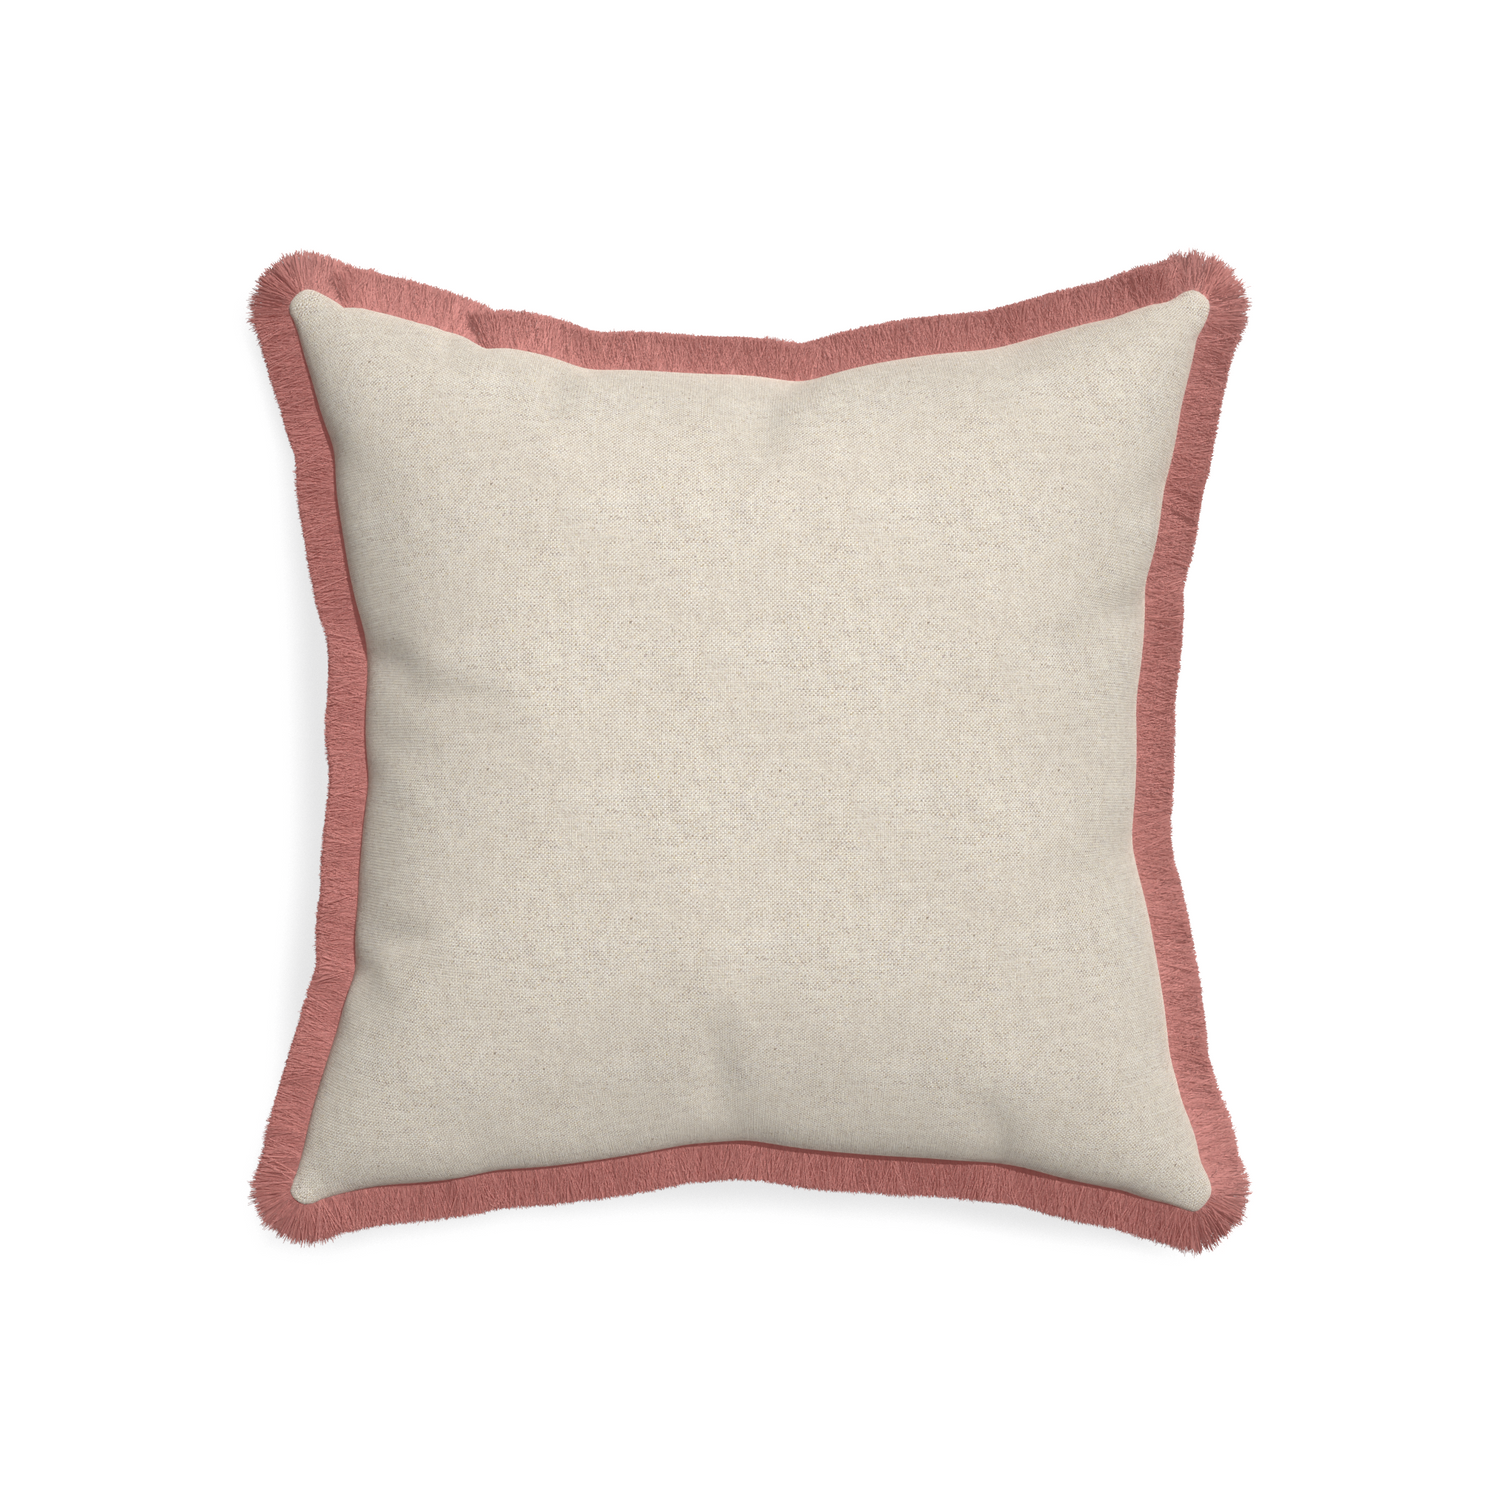 20-square oat custom light brownpillow with d fringe on white background